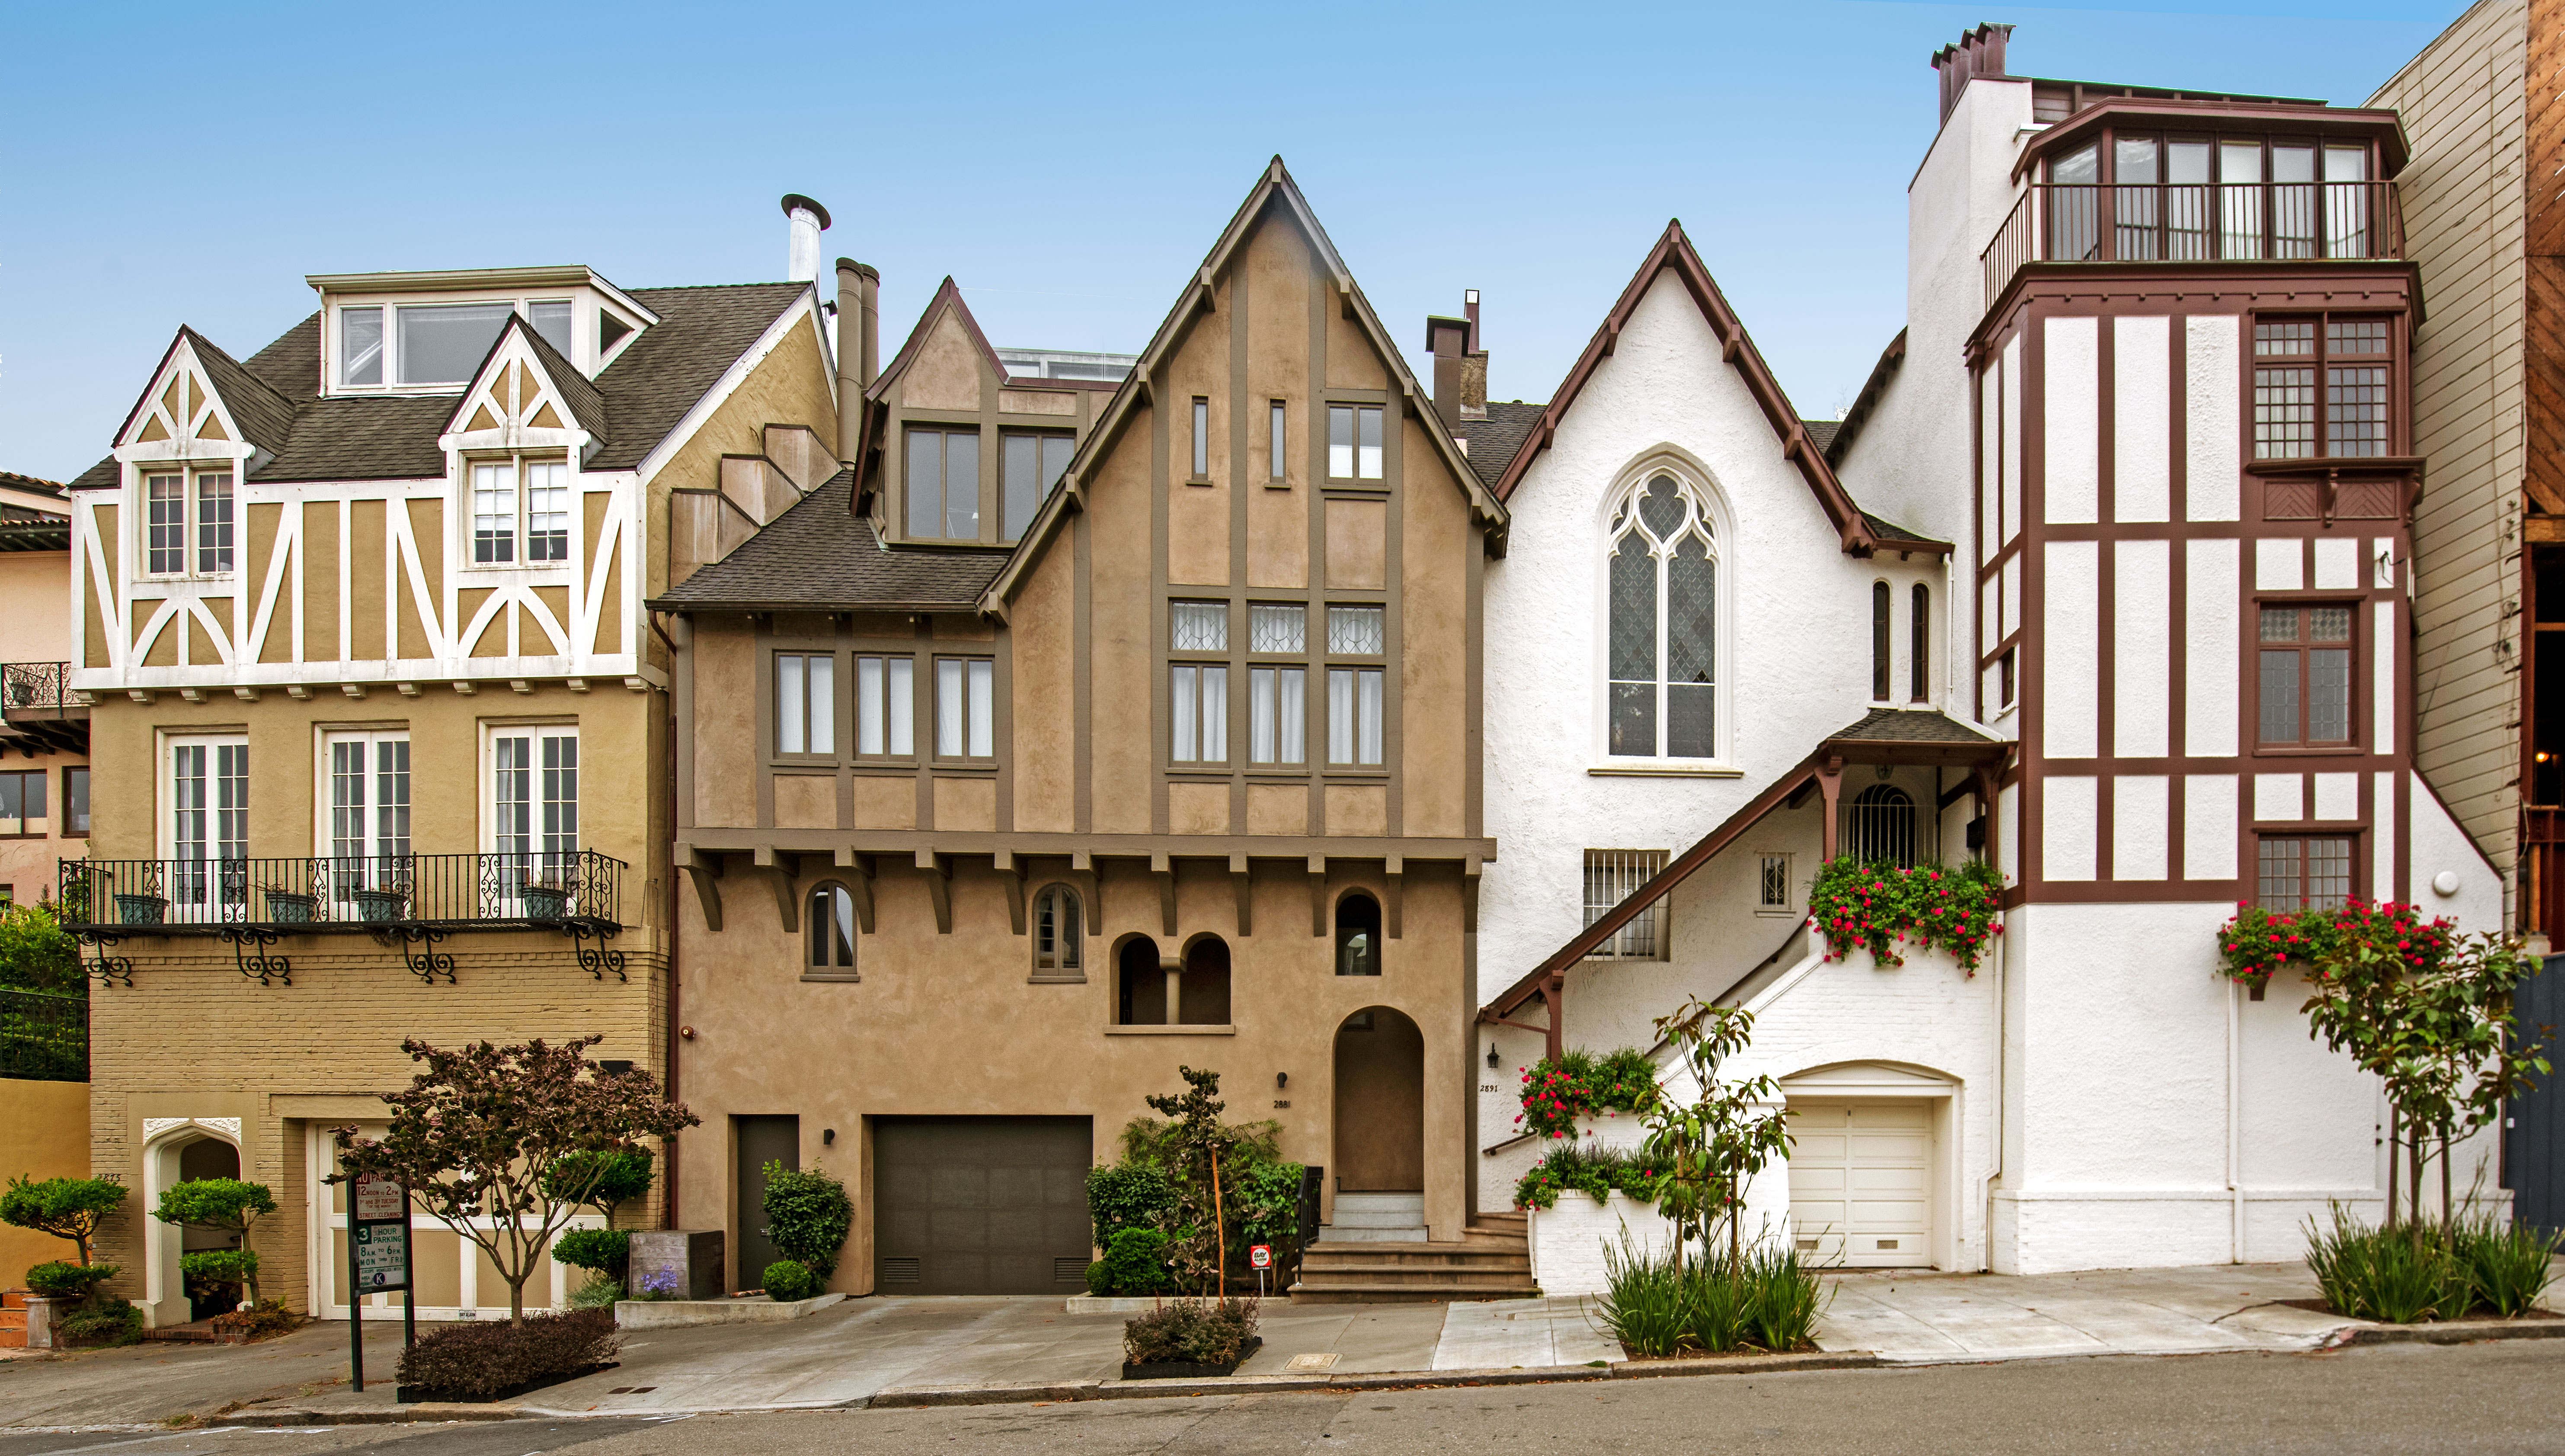 2175-2181Pacific Avenue in Pacific Heights, designed by Albert L. Farr, built 1902